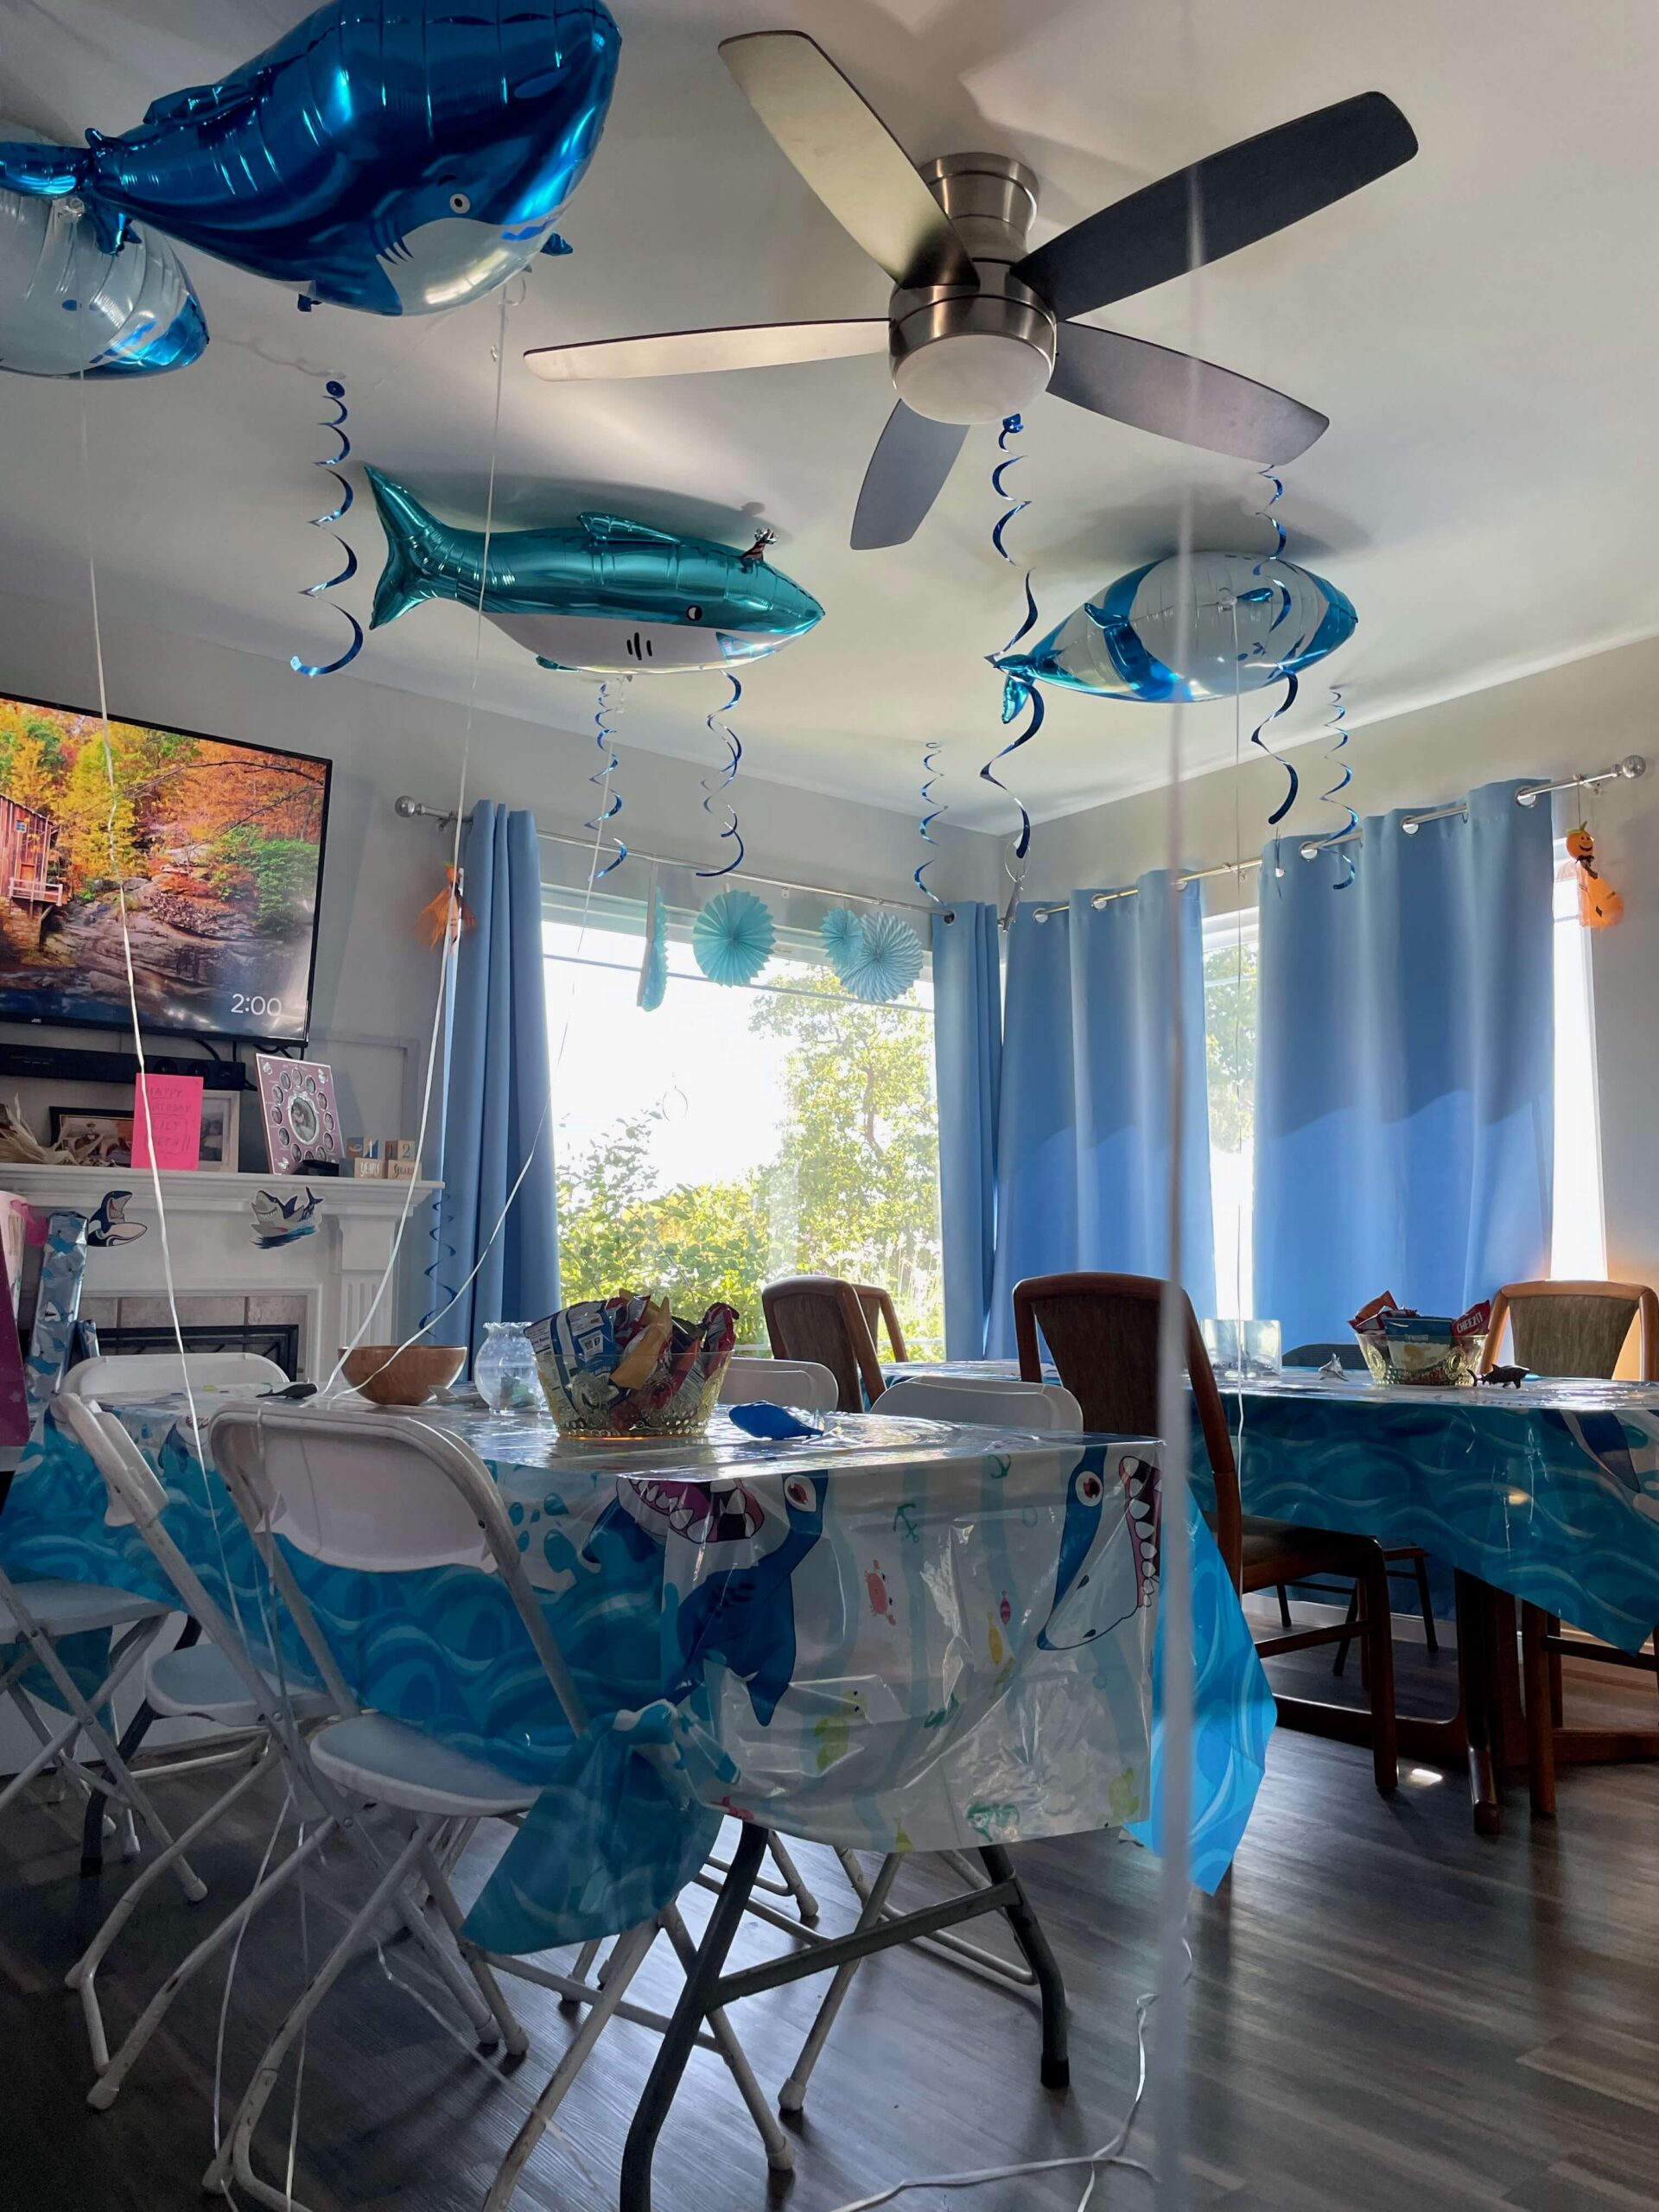 inside of a house with shark balloons and a shark tablecloth